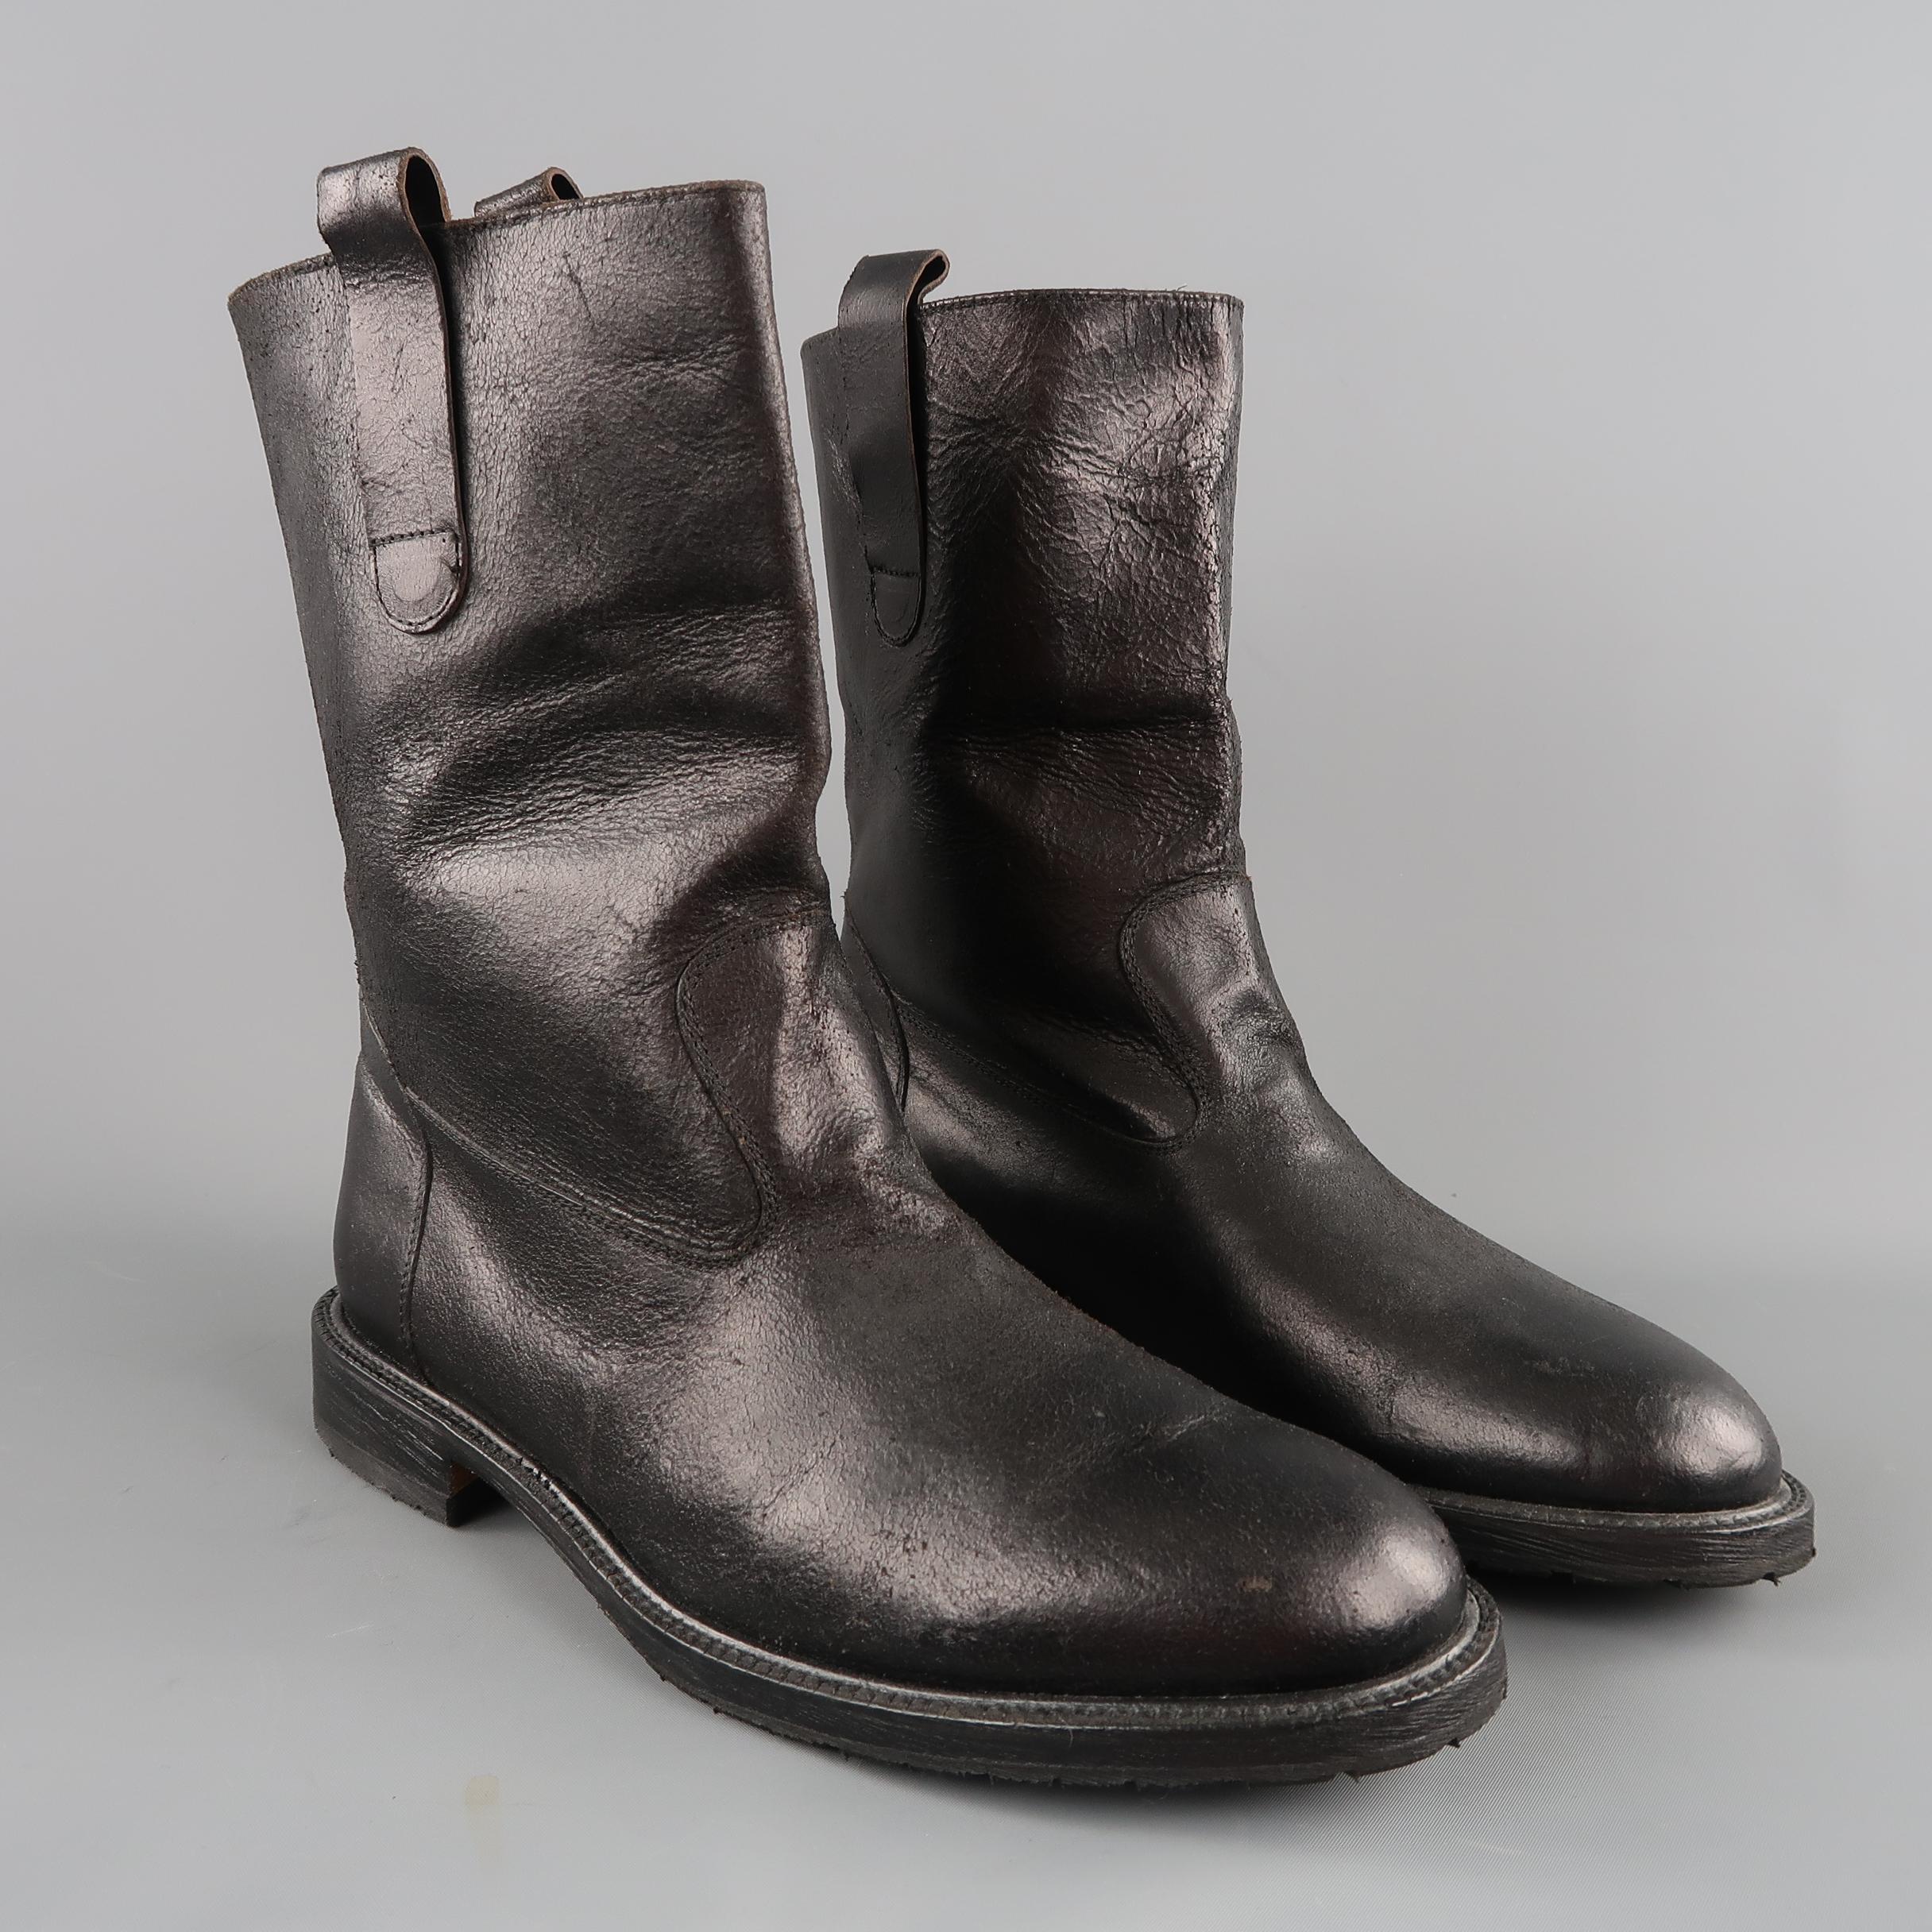 BILLY REID biker style boots come in distressed leather with a tapered toe, heeled sole, and mid calf pull on shaft with side tabs. Made in Italy.
 
New with Tag.
Marked: UK 11
 
Measurements:
 
Length: 10 in.